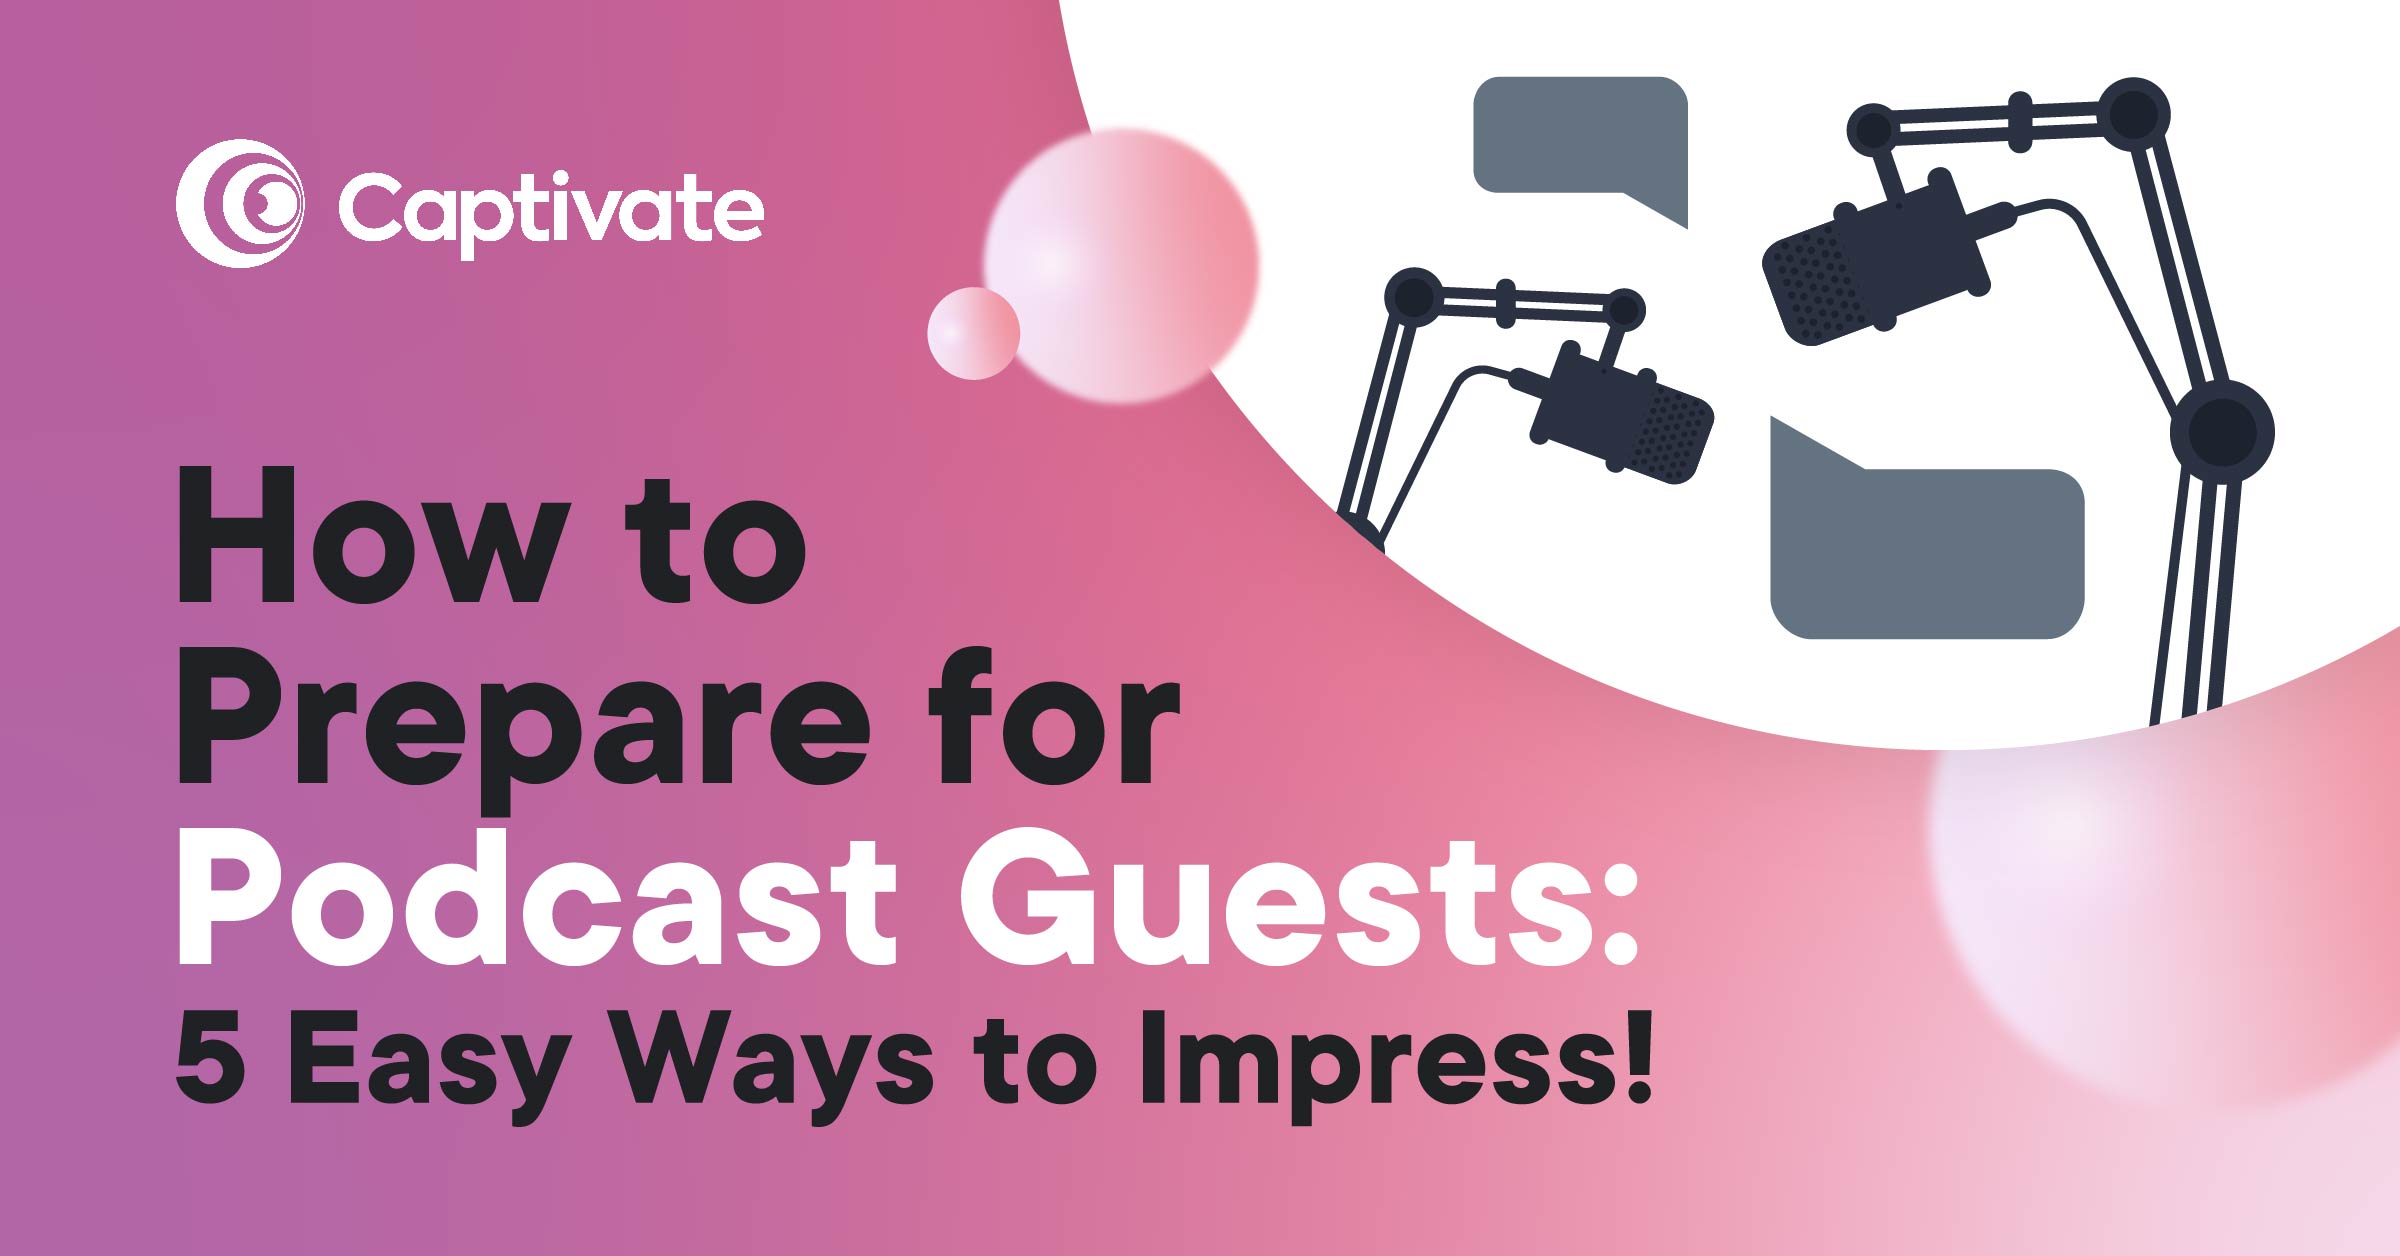 How to Prepare for Podcast Guests: 5 Easy Ways to Impress! | Captivate